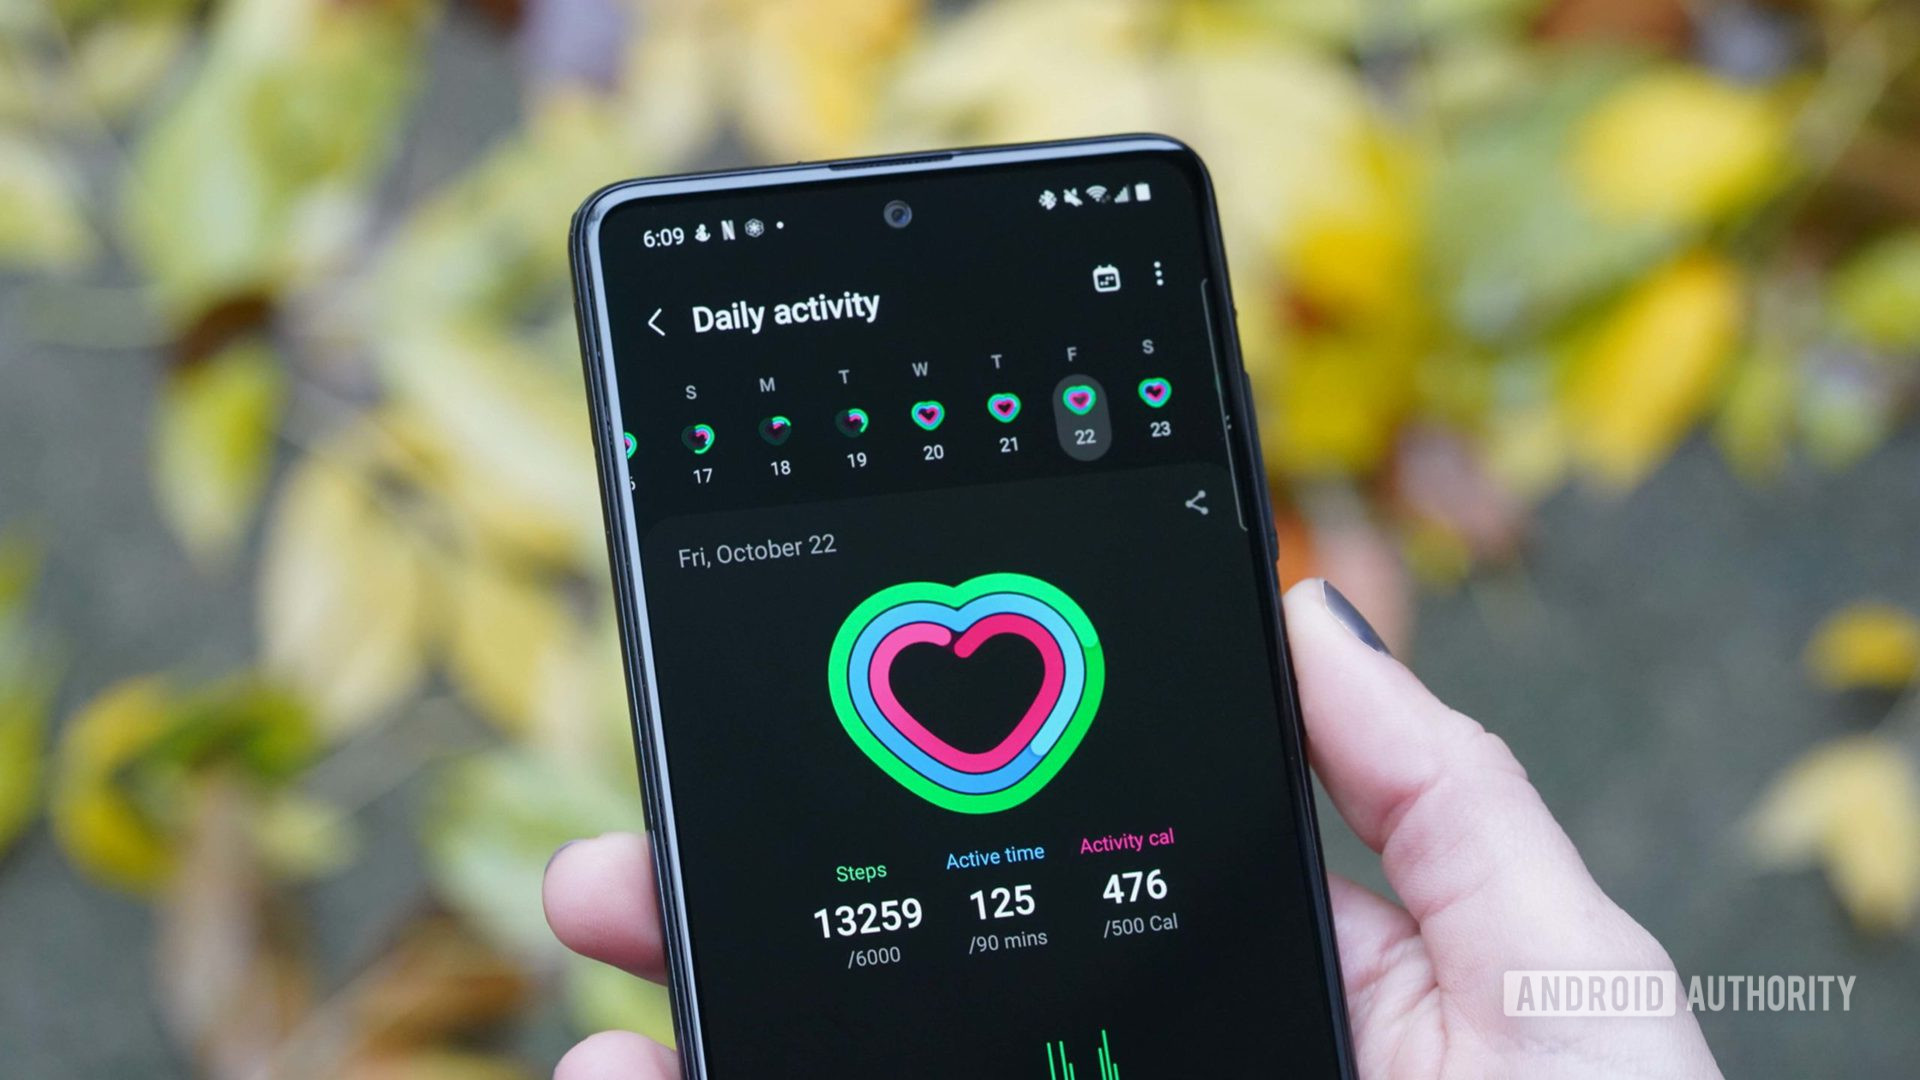 A user reviews their daily activity in the samsung health app.